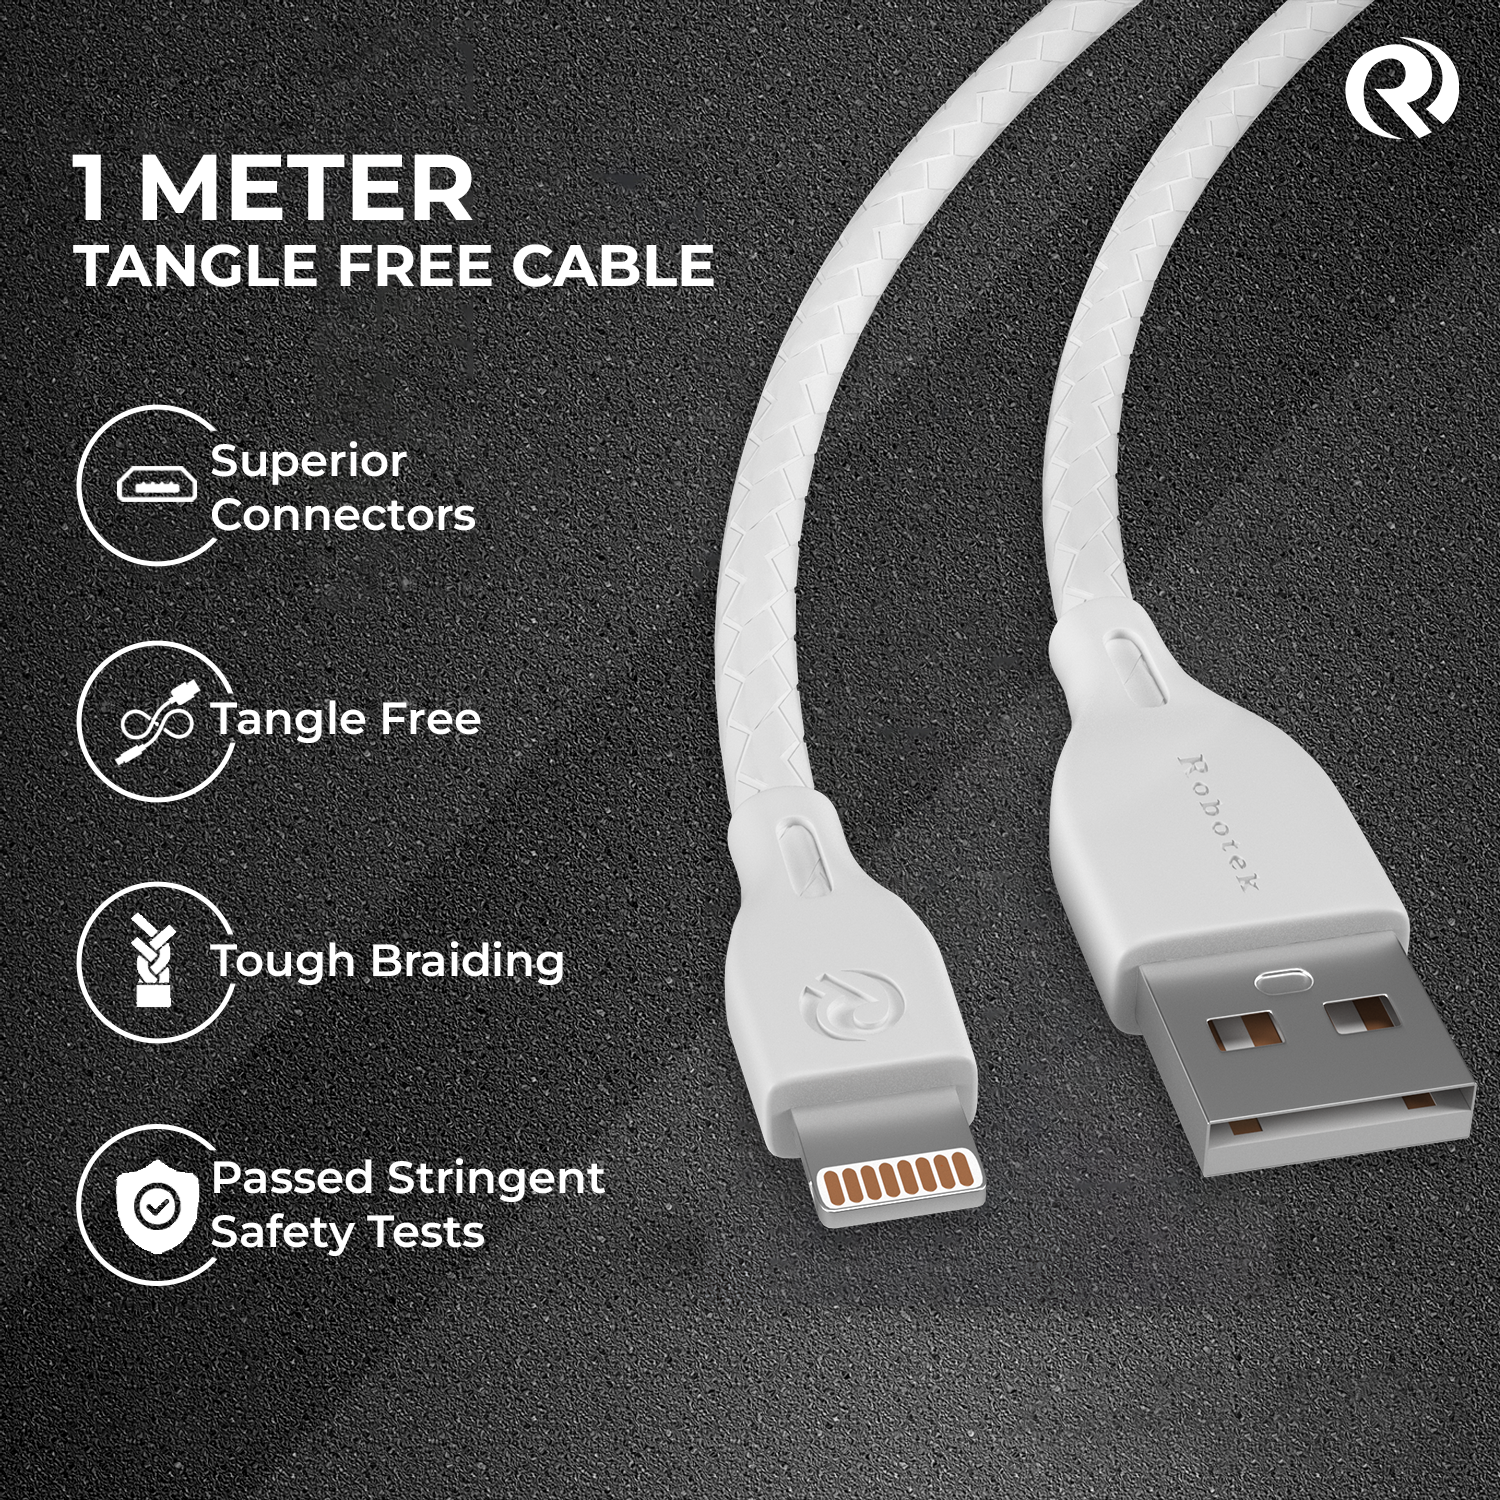 ROBOTEK DC10X USB to iPhone Lightning Fast Charging Cable, 2.4Amp Sync & Fast Charging Cable Compatible for Iphone, Ipad And Ipod. Fast Charging Lightning Cable, Tangle Free TPE Cable, 3.2 Feet (1.0M)